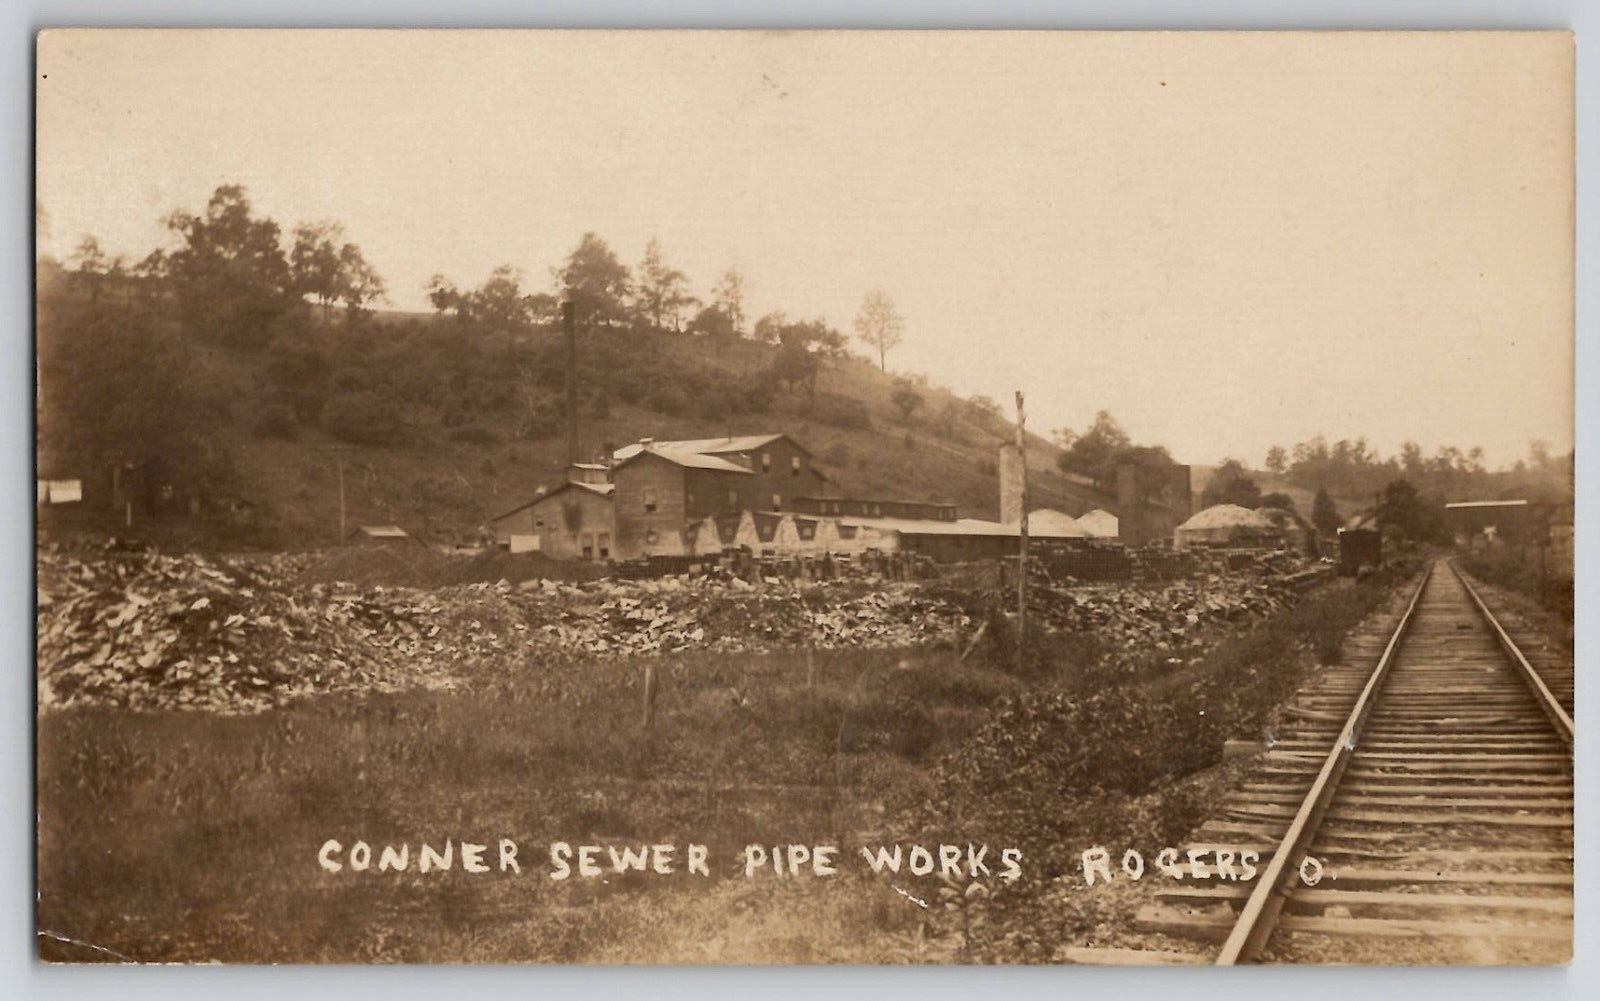 1913 Rogers Ohio Conner Sewer Pipe Works Columbiana County OH RPPC Postcard